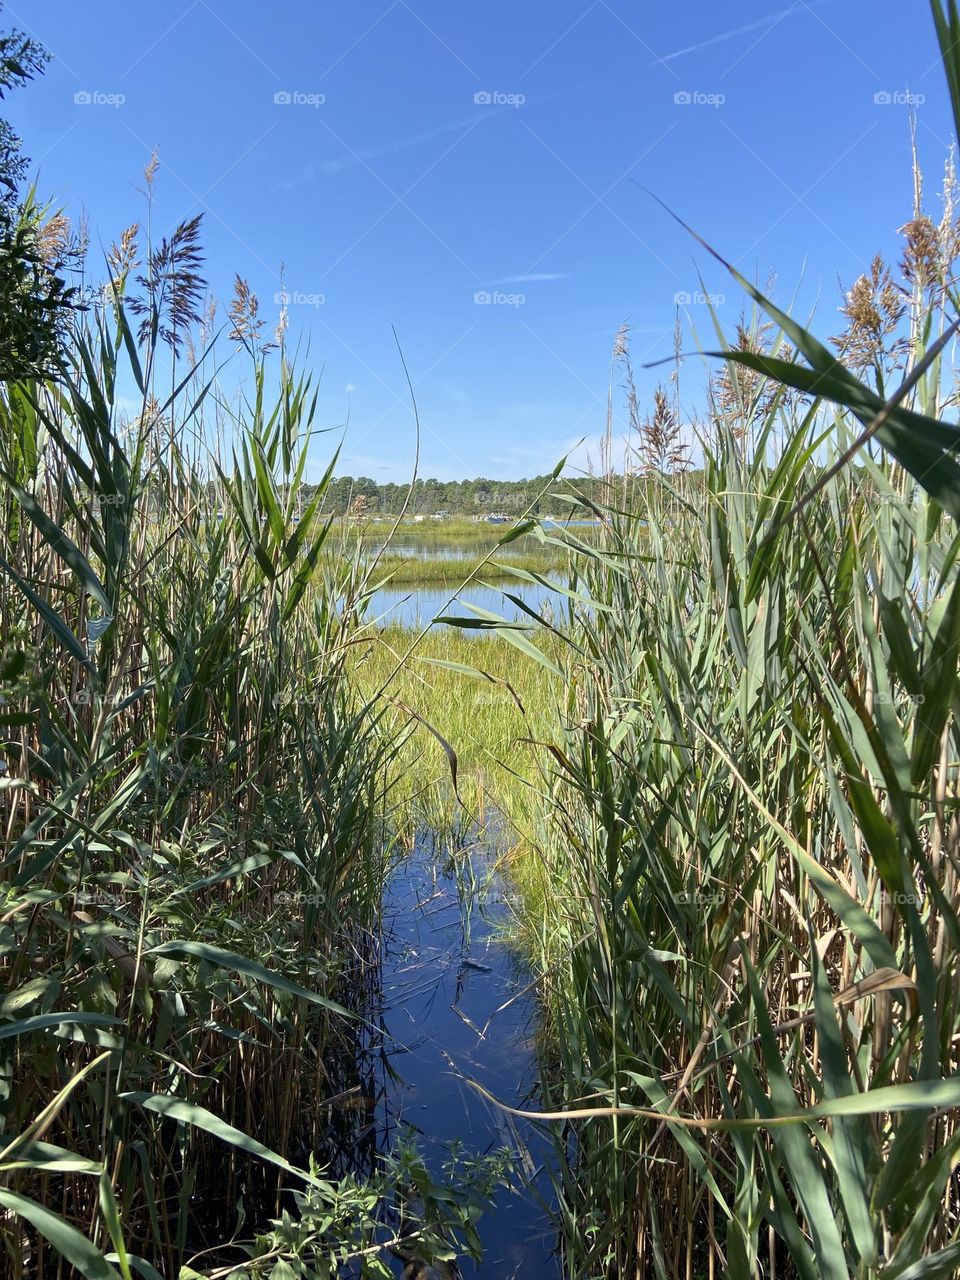 Looking out at the wetlands and bay at Cattus Island County Park in Toms River, NJ through an opening in the dense vegetation at the edge of neighboring woods. This place has an amazing diversity of plants, wildlife, land, trees, and water. 